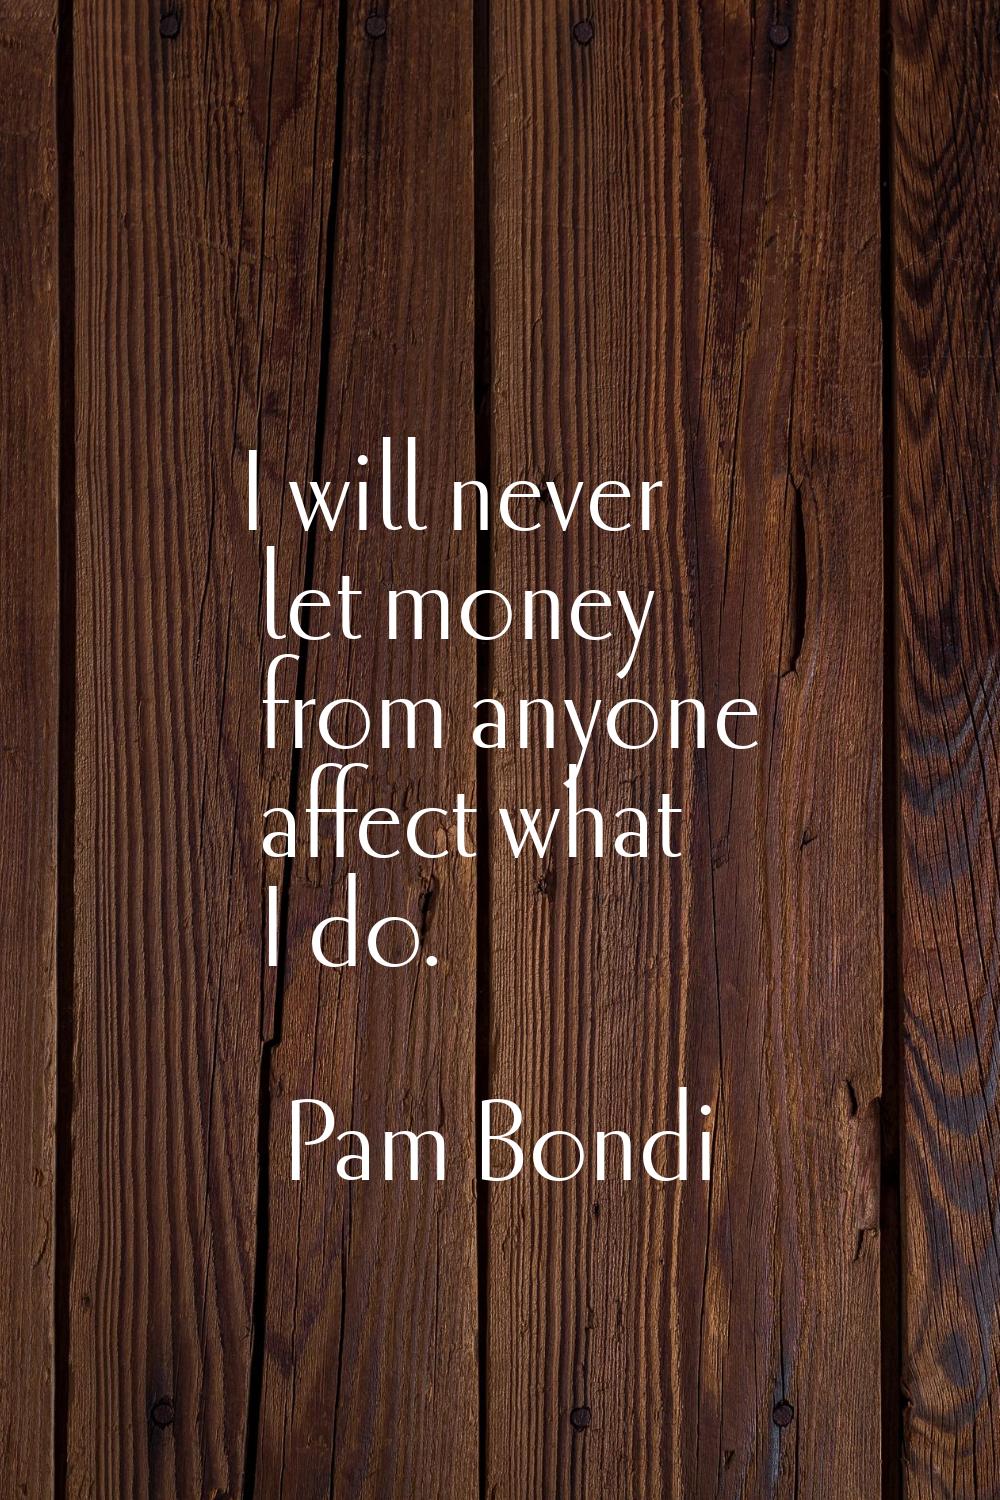 I will never let money from anyone affect what I do.